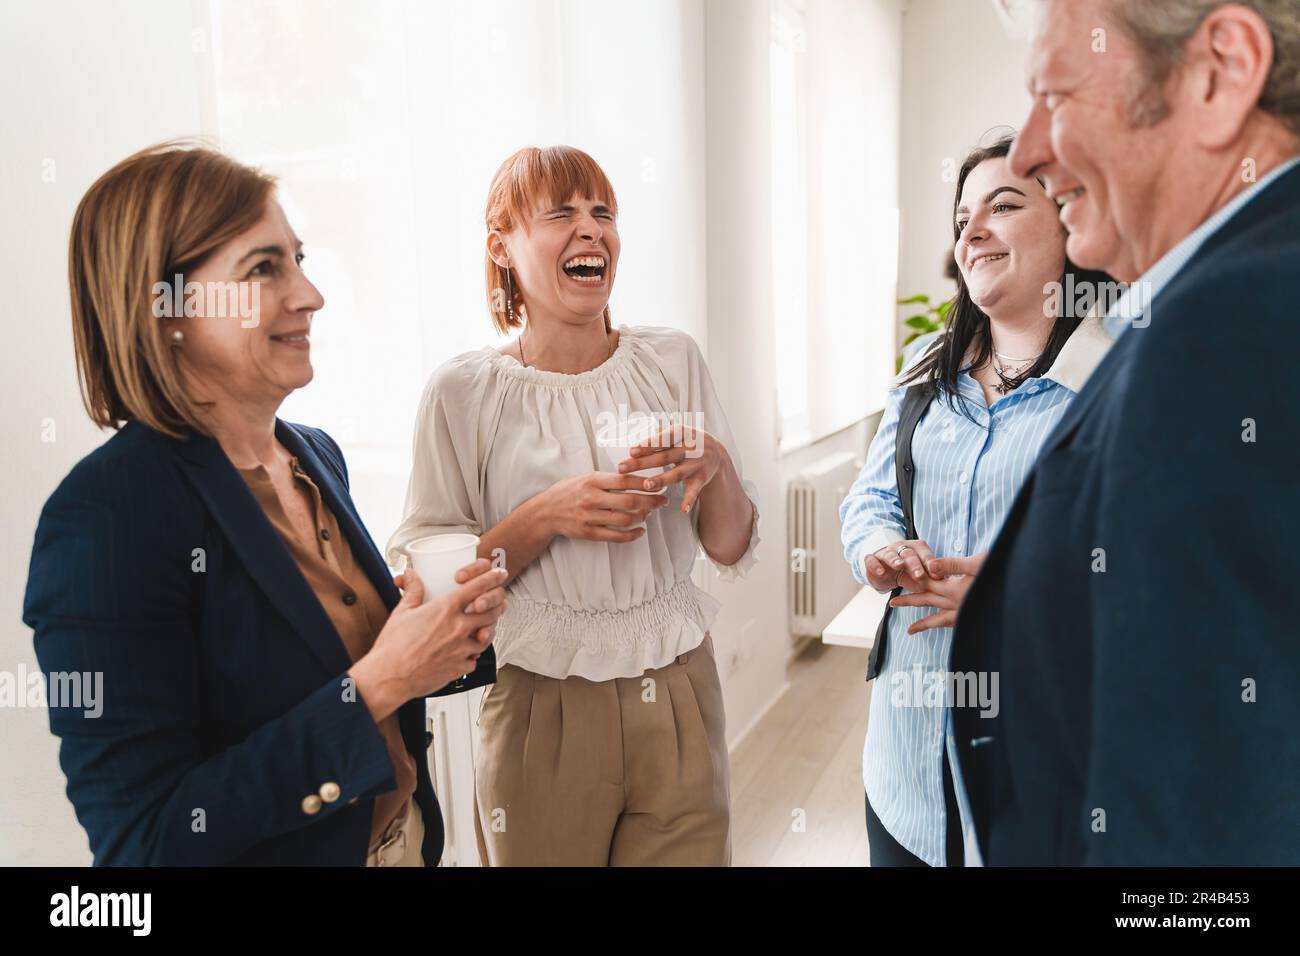 Colleagues of mixed ages and genders taking a break in office, standing near a window, laughing and chatting. Focus is on young redhead woman laughing Stock Photo